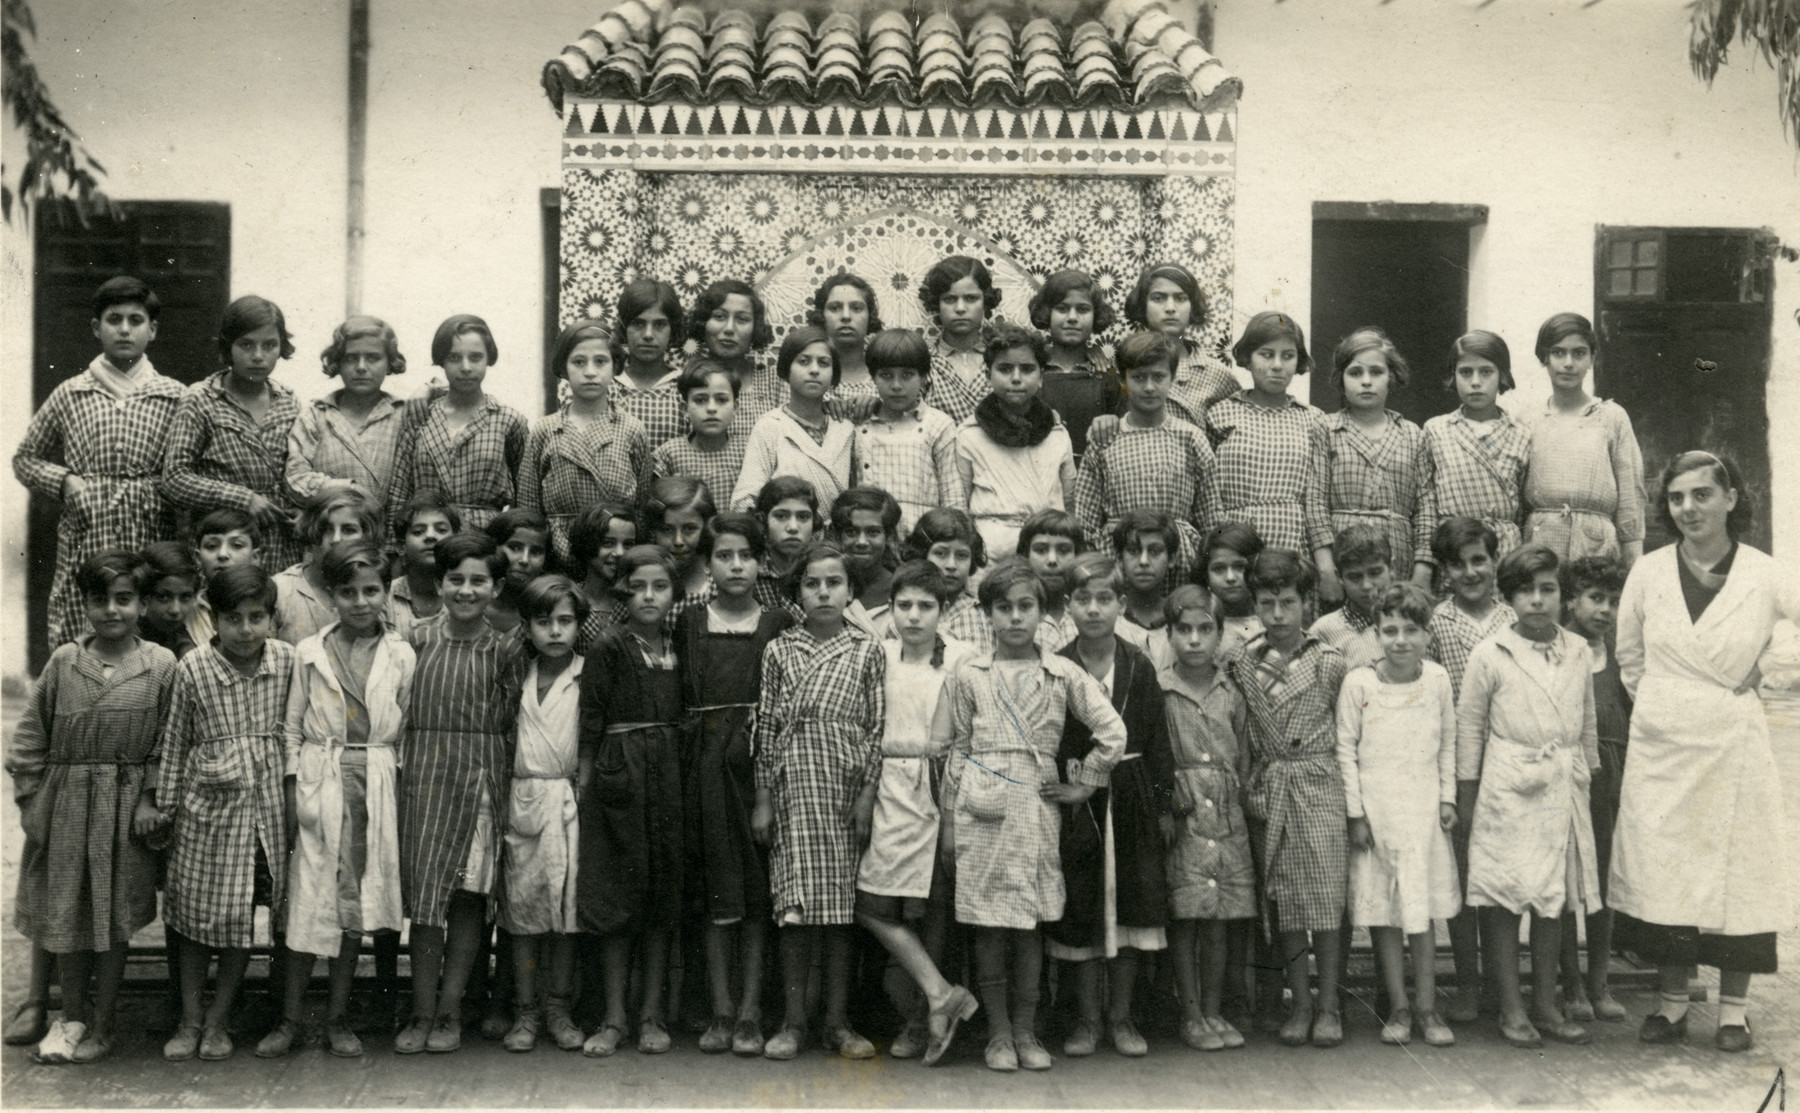 The Alliance Israélite Universelle (AIU), a French-Jewish organization, had begun opening schools in Morocco in 1862. (c) AIU